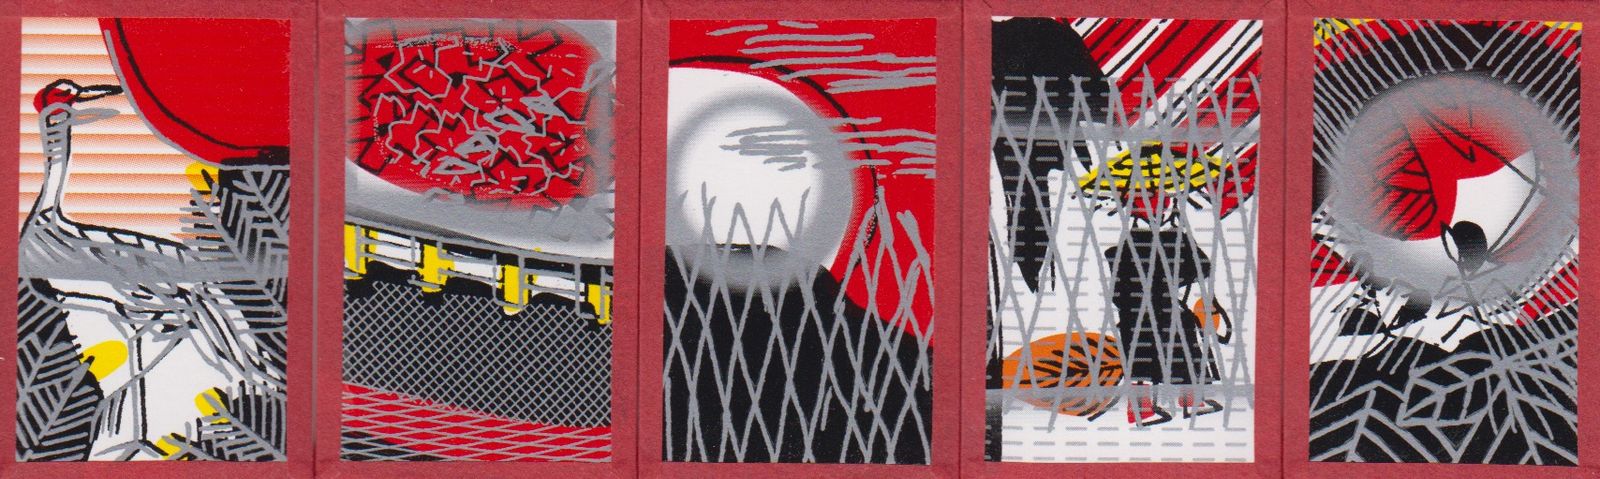 Five hanafuda cards which are overpainted in silver and gold paints in various patterns, obscuring the details.